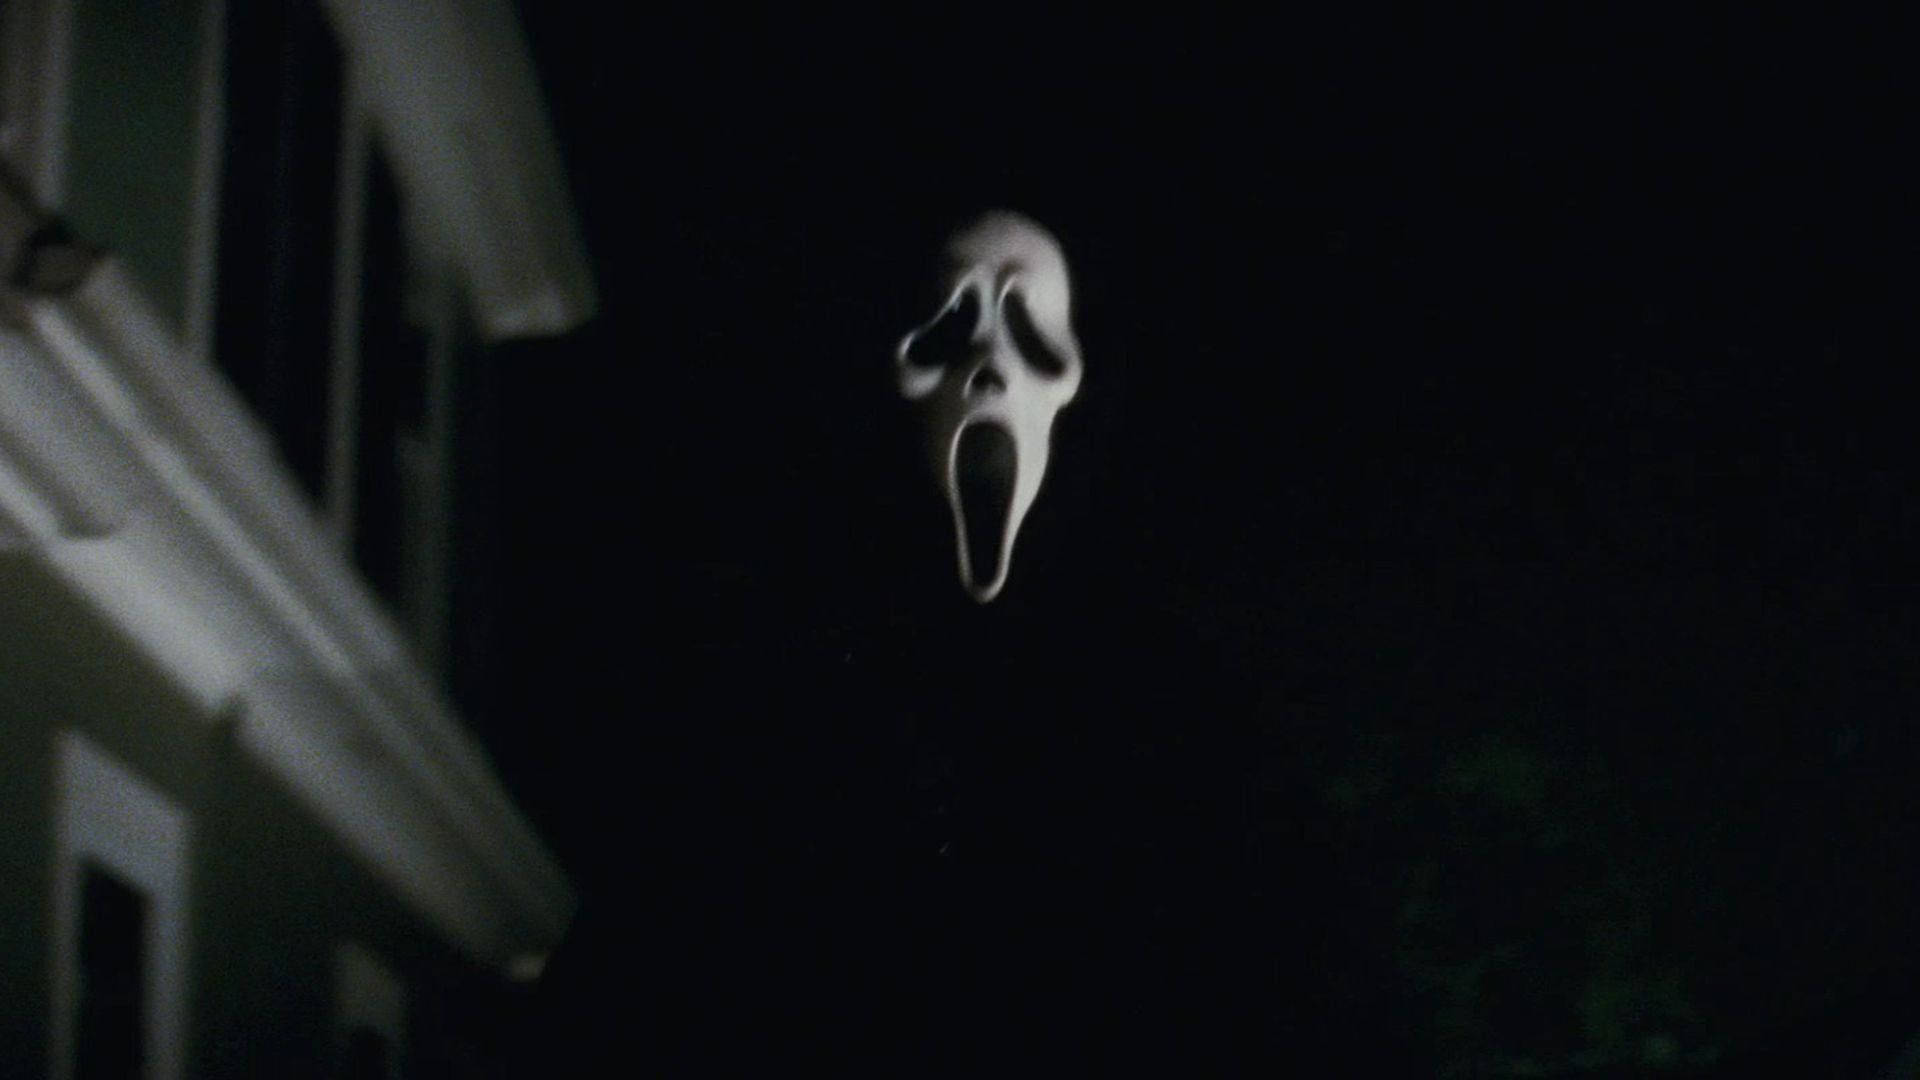 1920X1080 Scream Wallpaper and Background